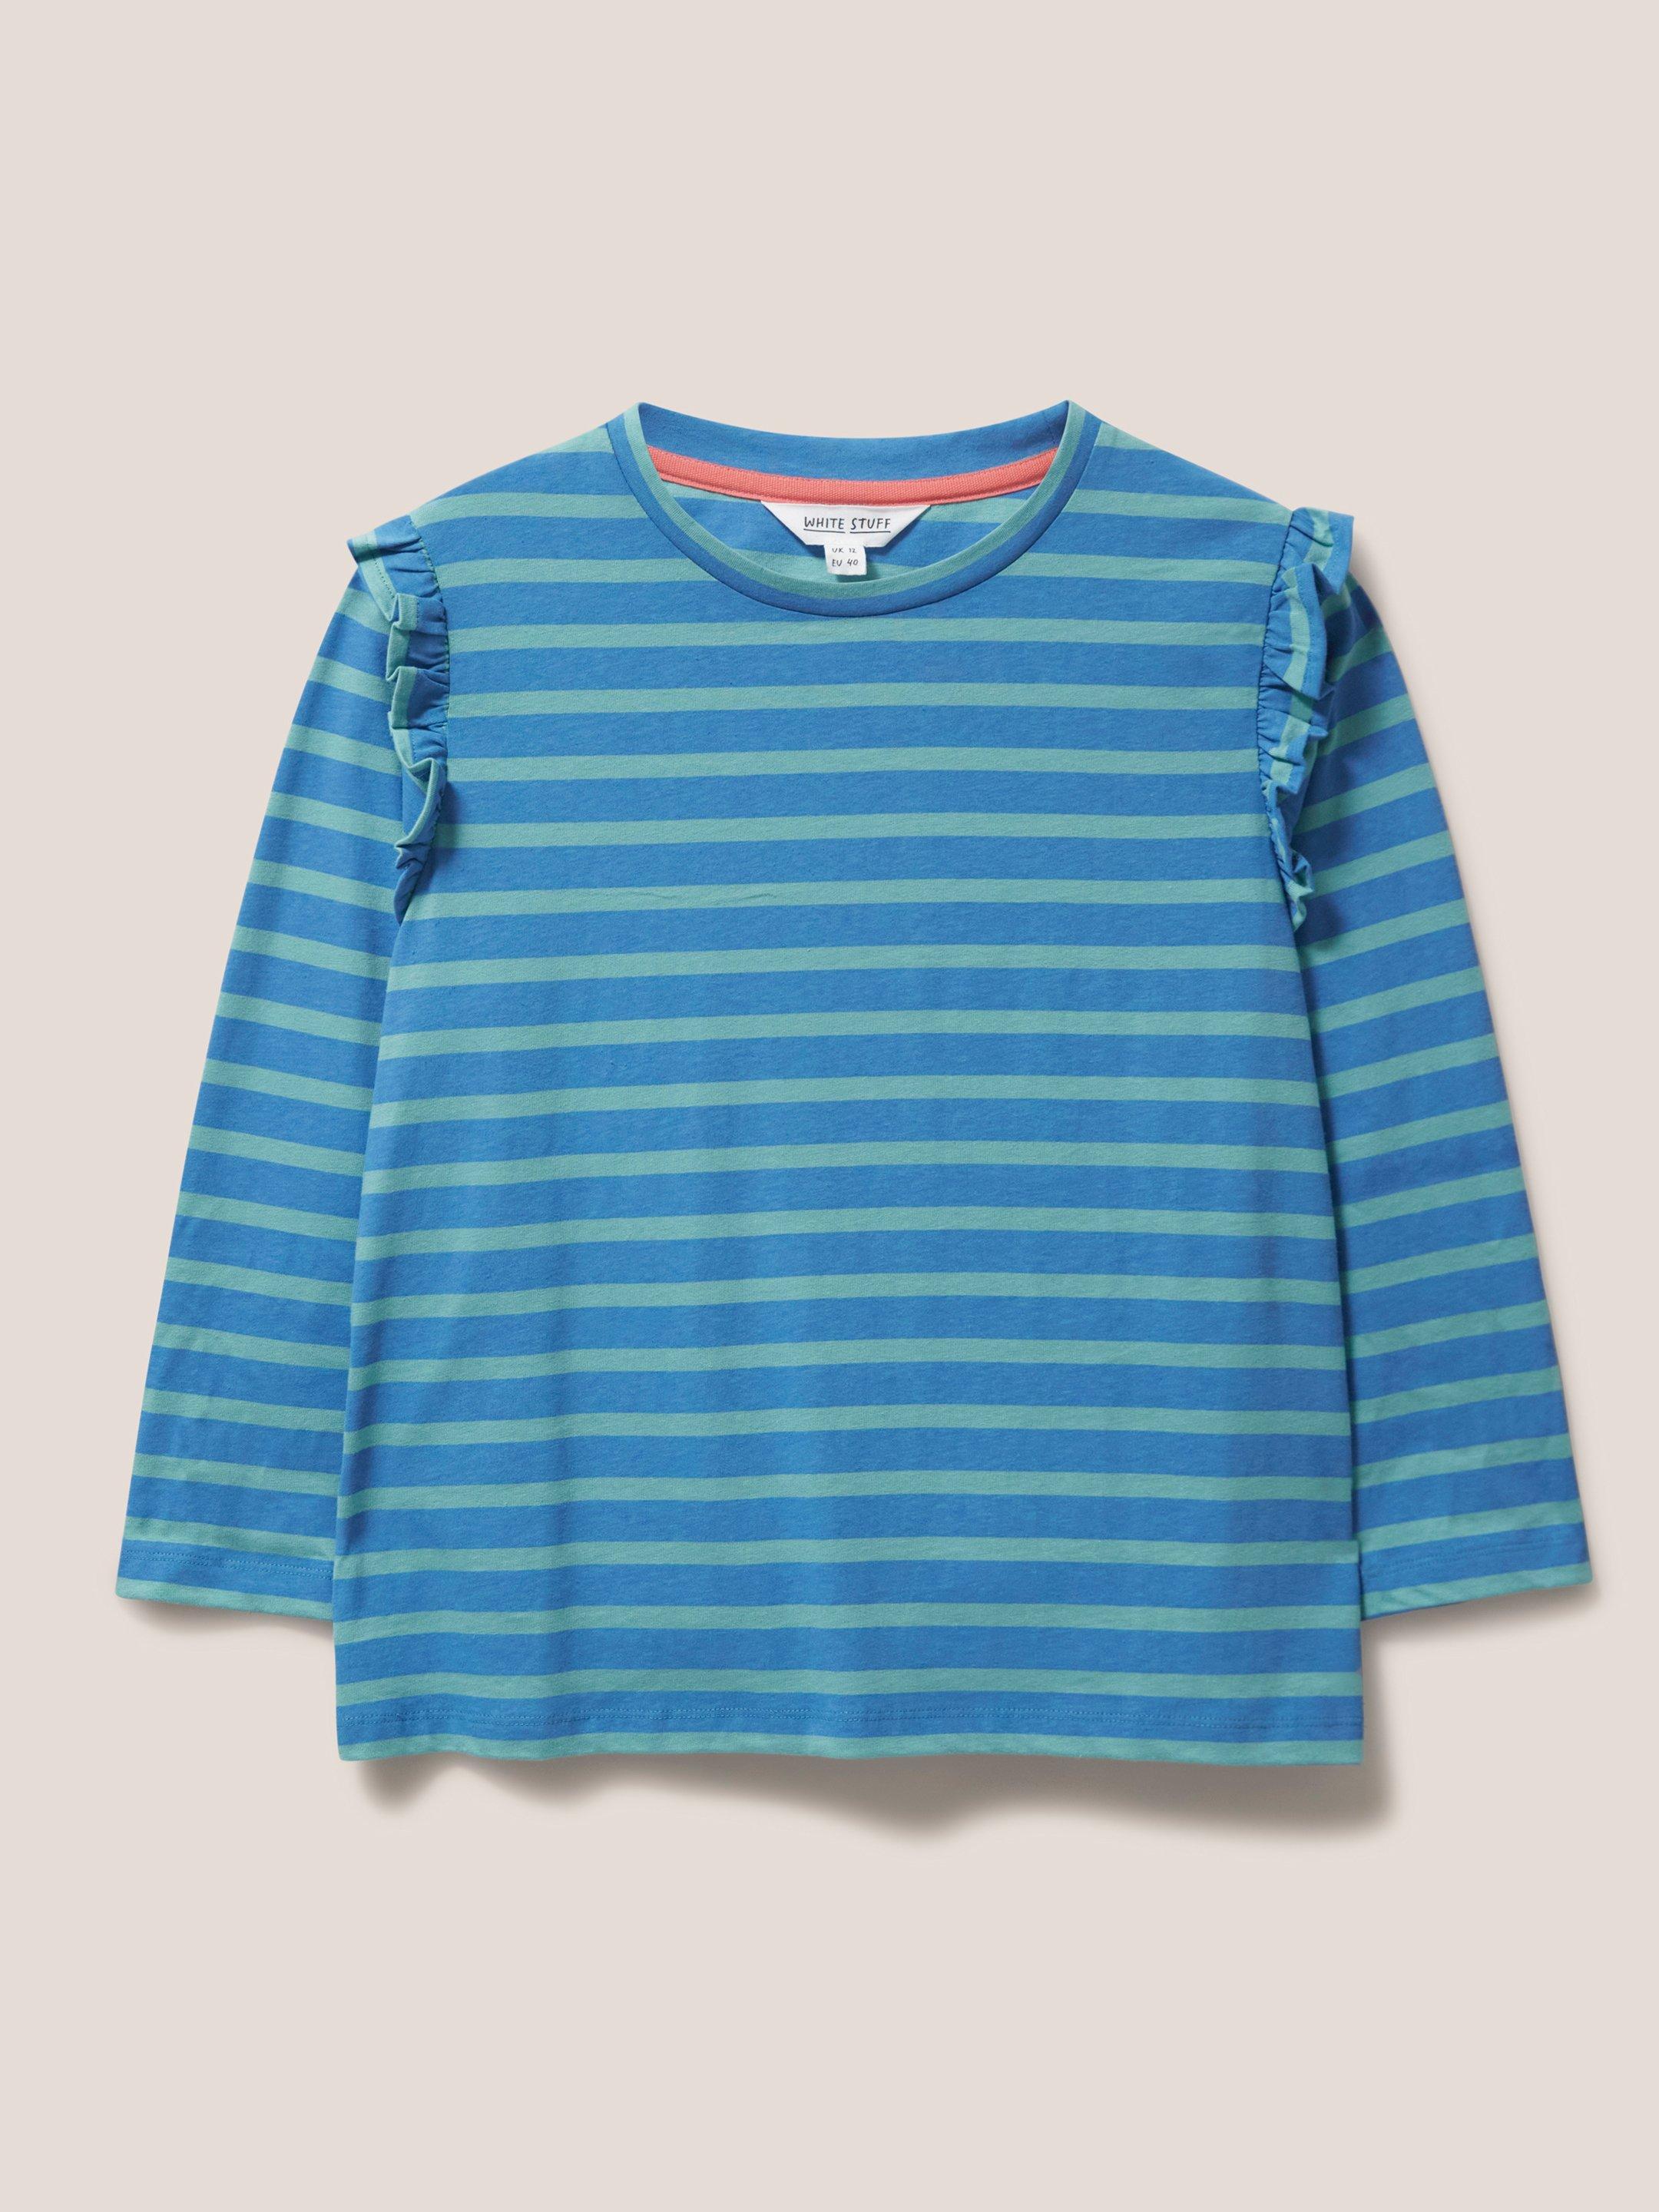 Ruffle Tee in BLUE MLT - FLAT FRONT